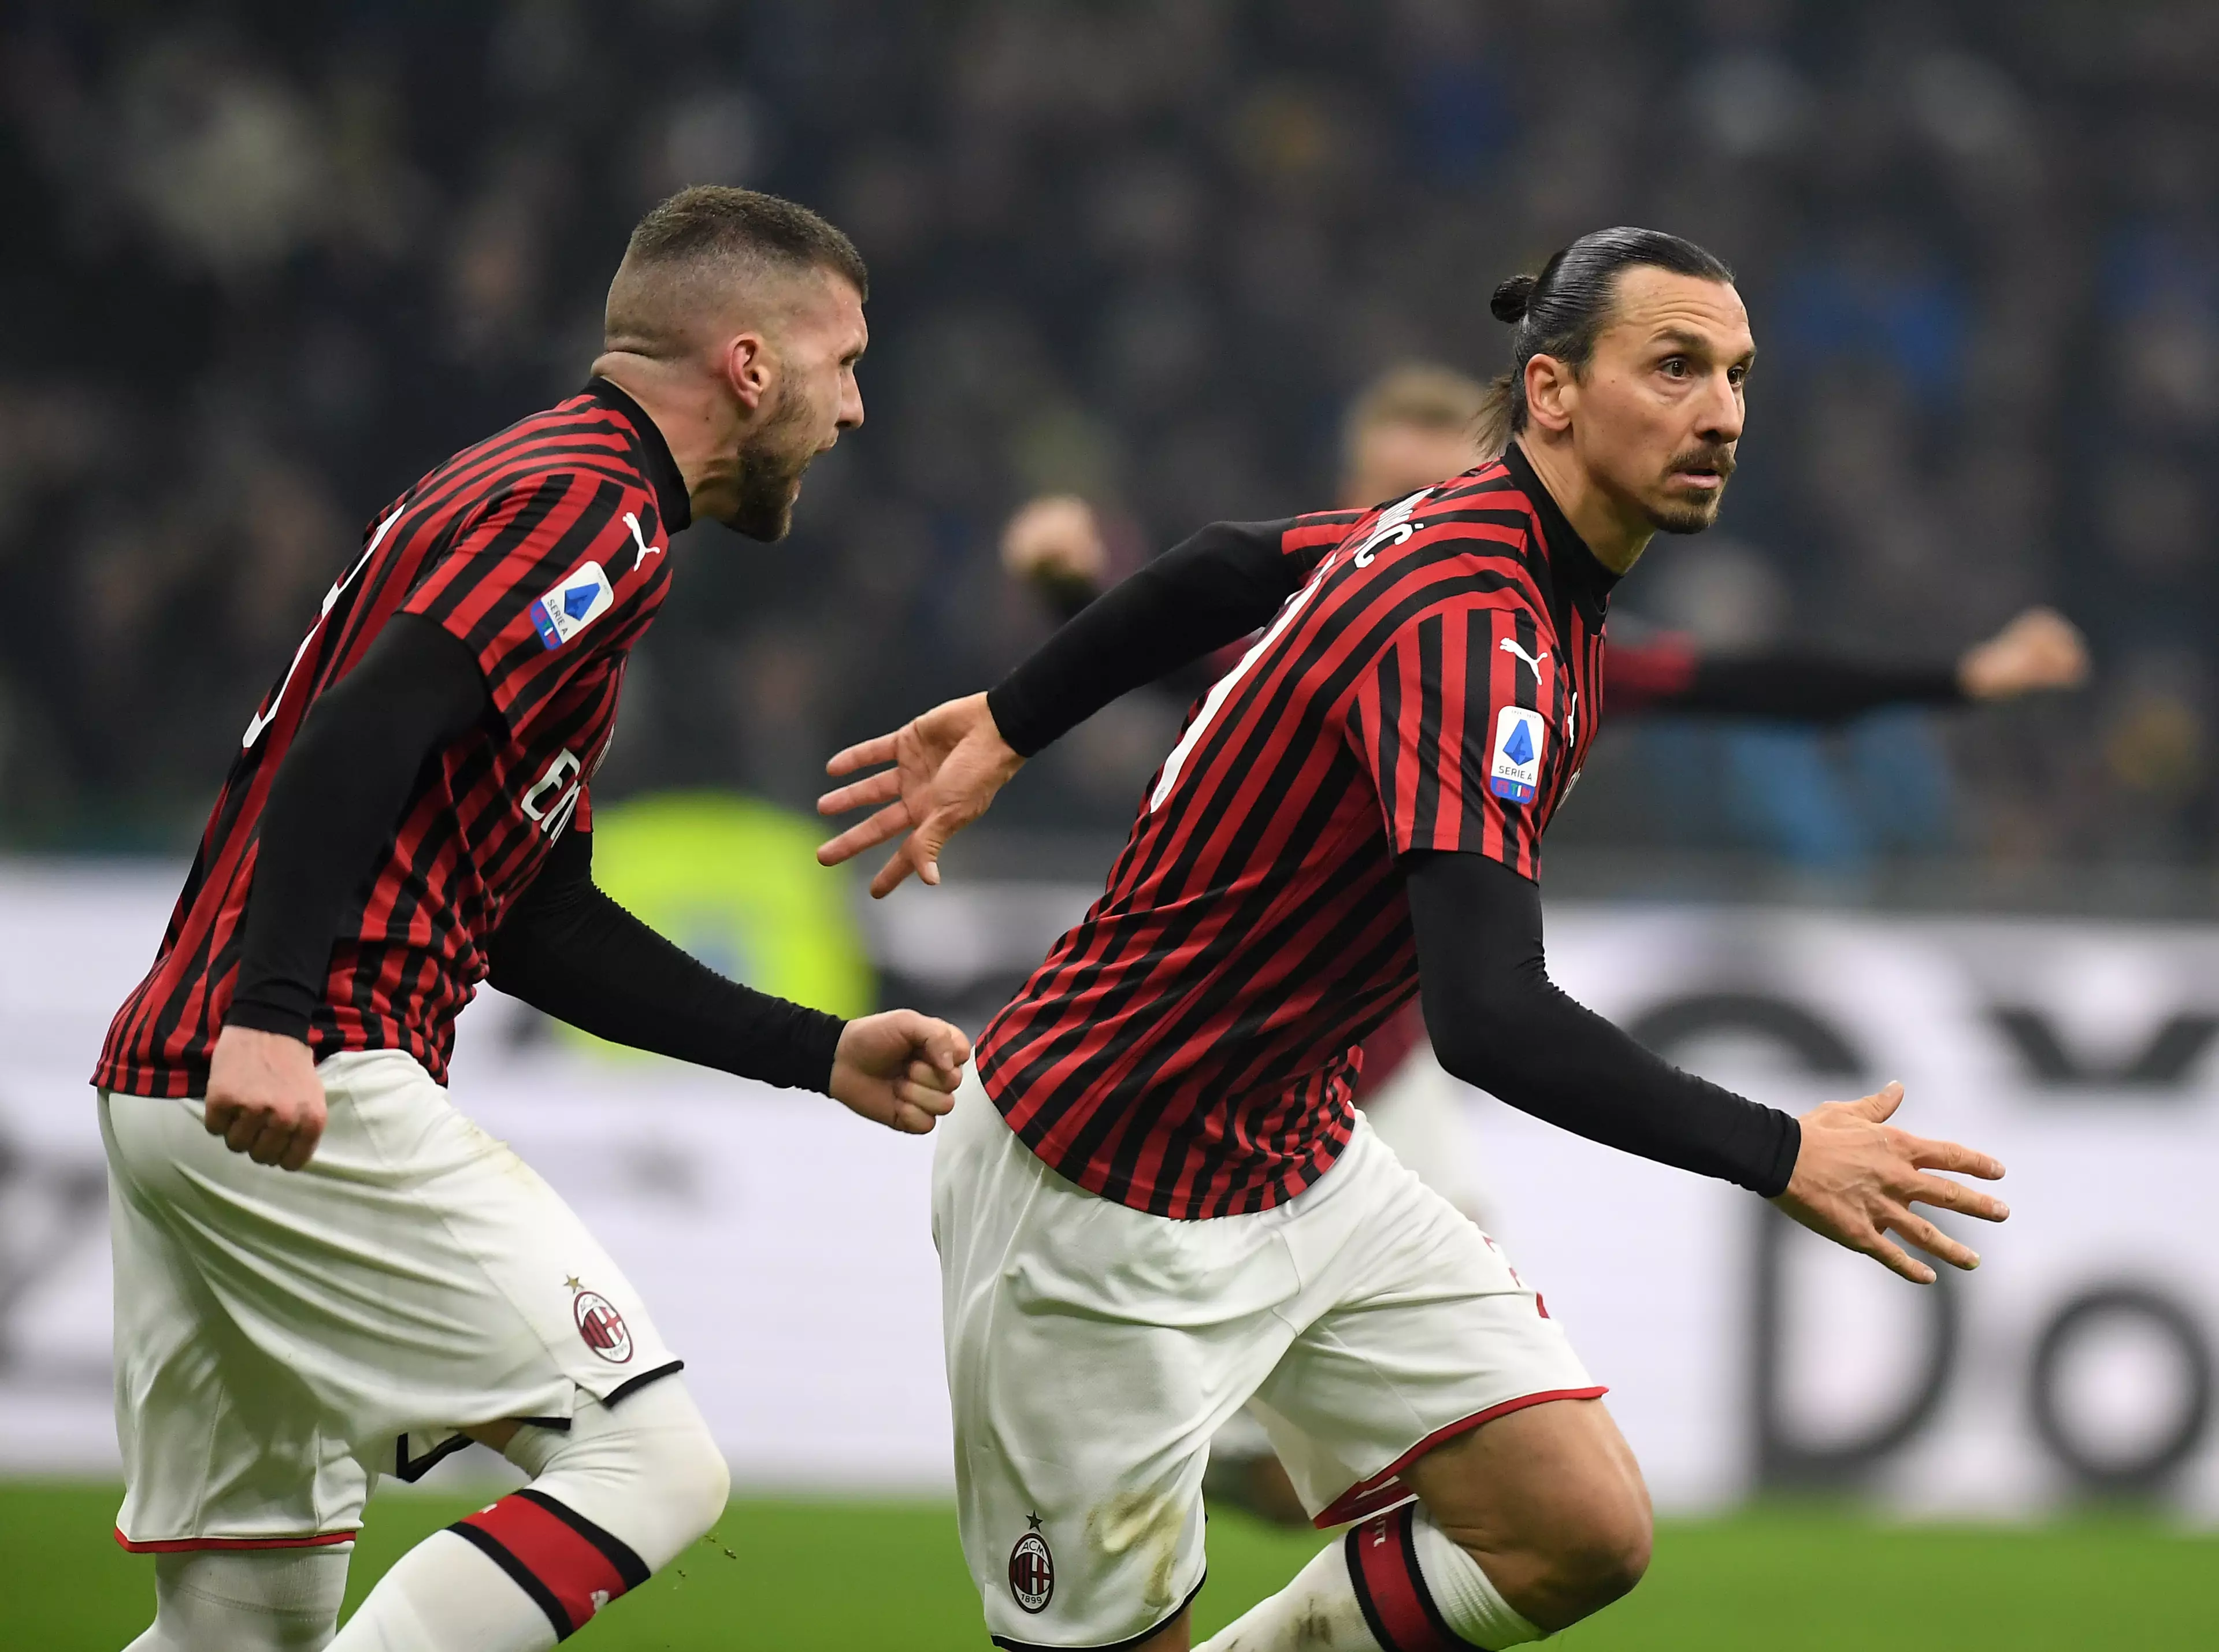 Ibrahimovic celebrates scoring in the derby against Inter. Image: PA Images